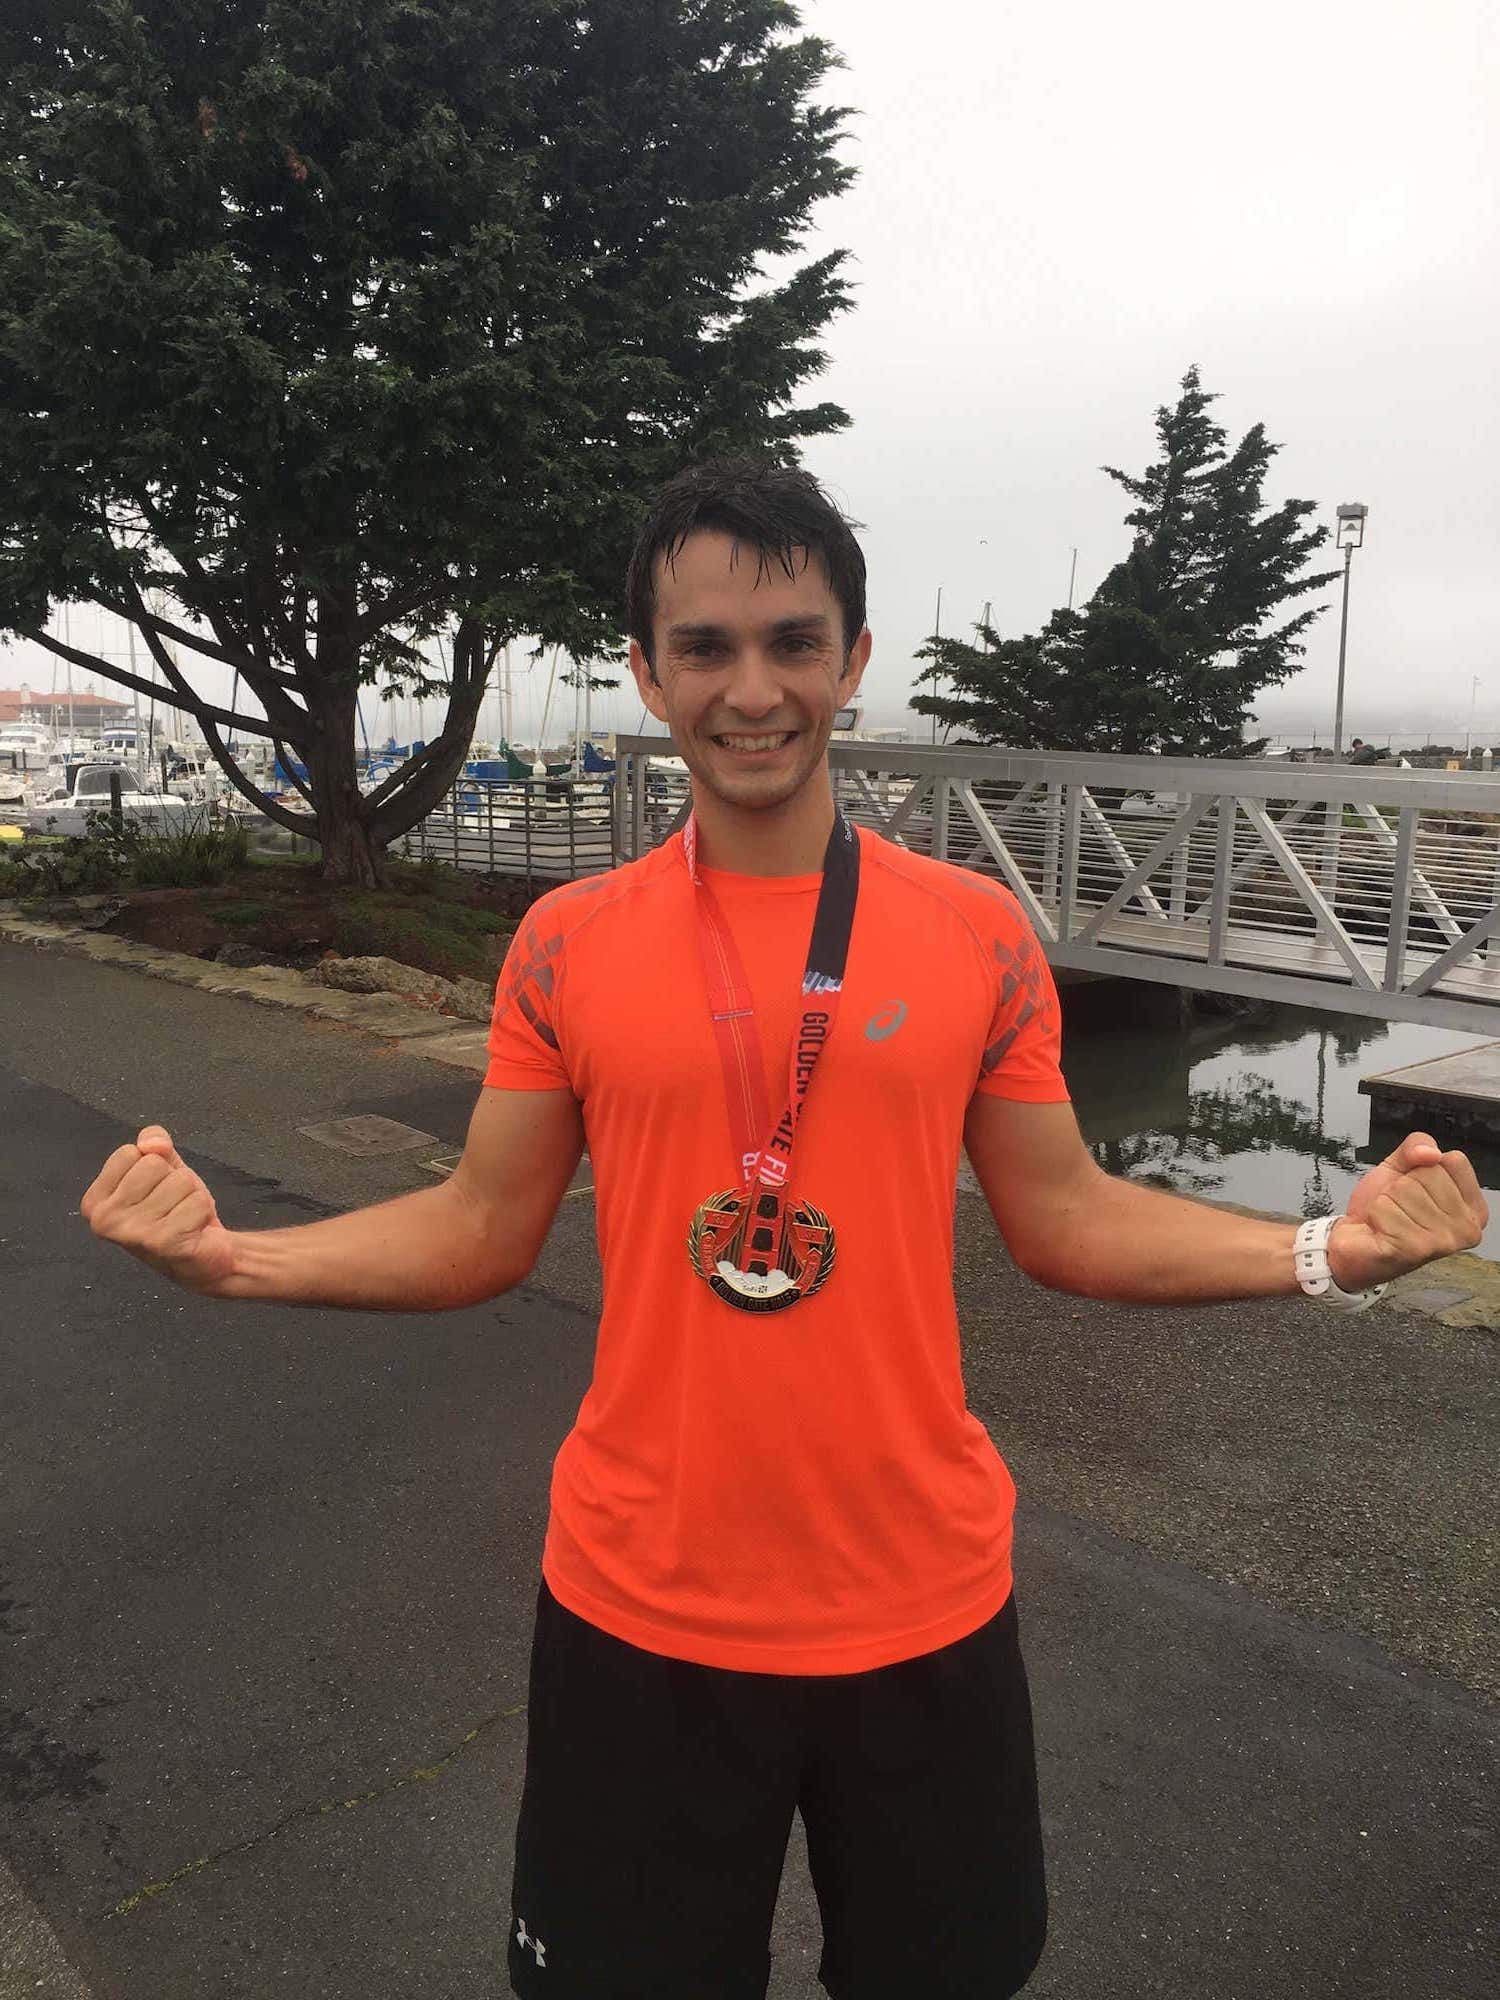 Me, after crossing the finish line of the 2016 Golden Gate Half Marathon